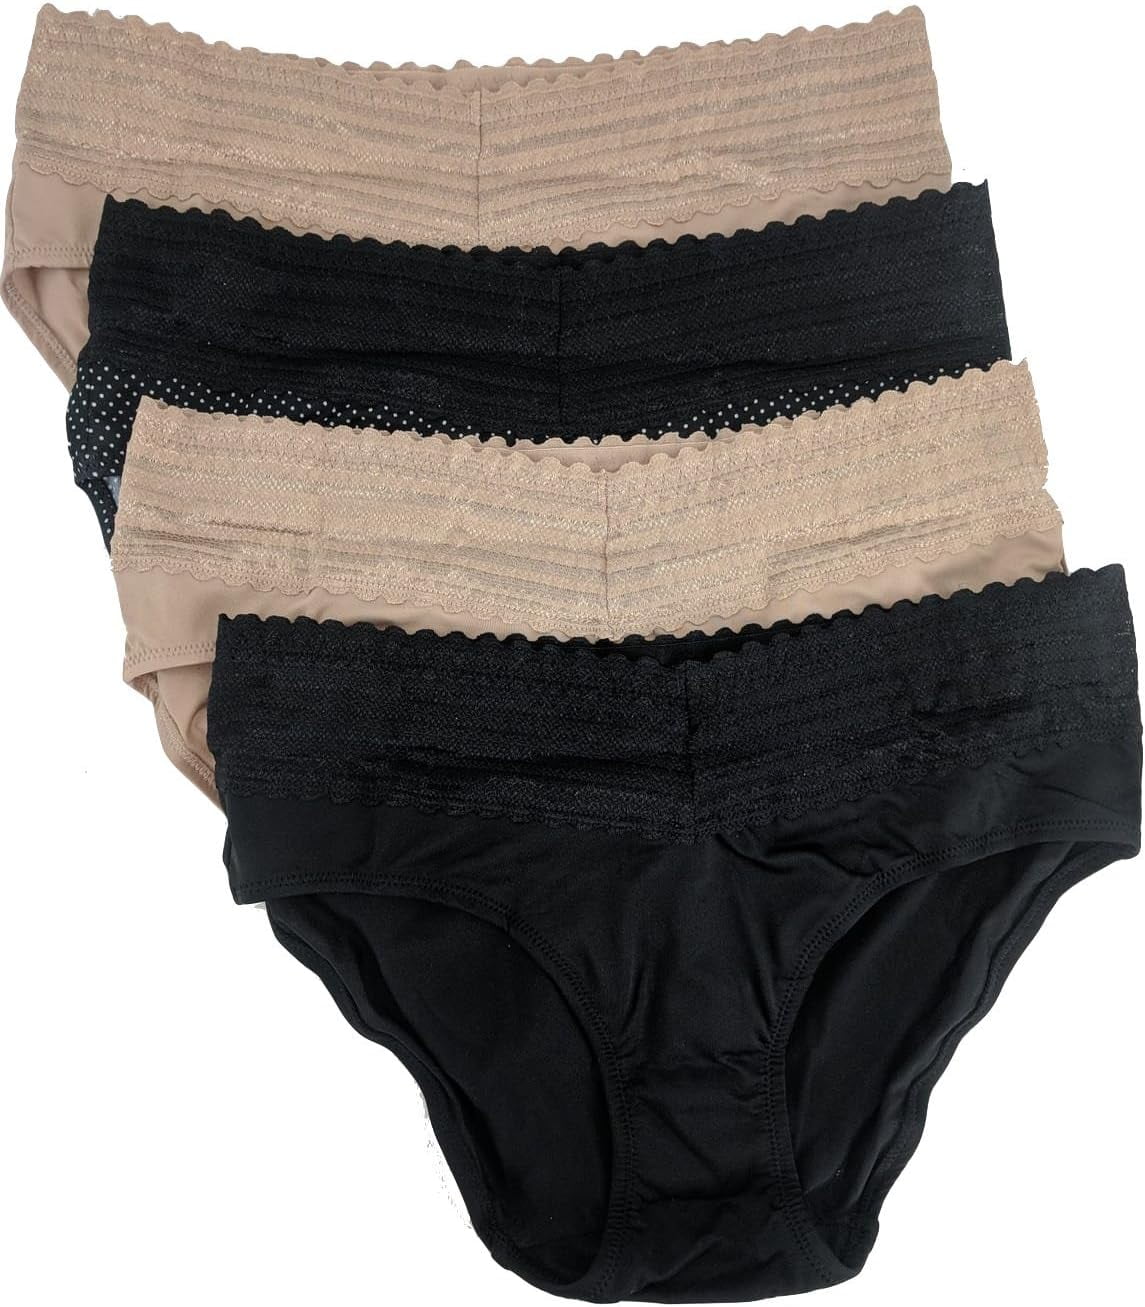 Warner's Women's No Muffin Top No Pinching Hipster Panty with